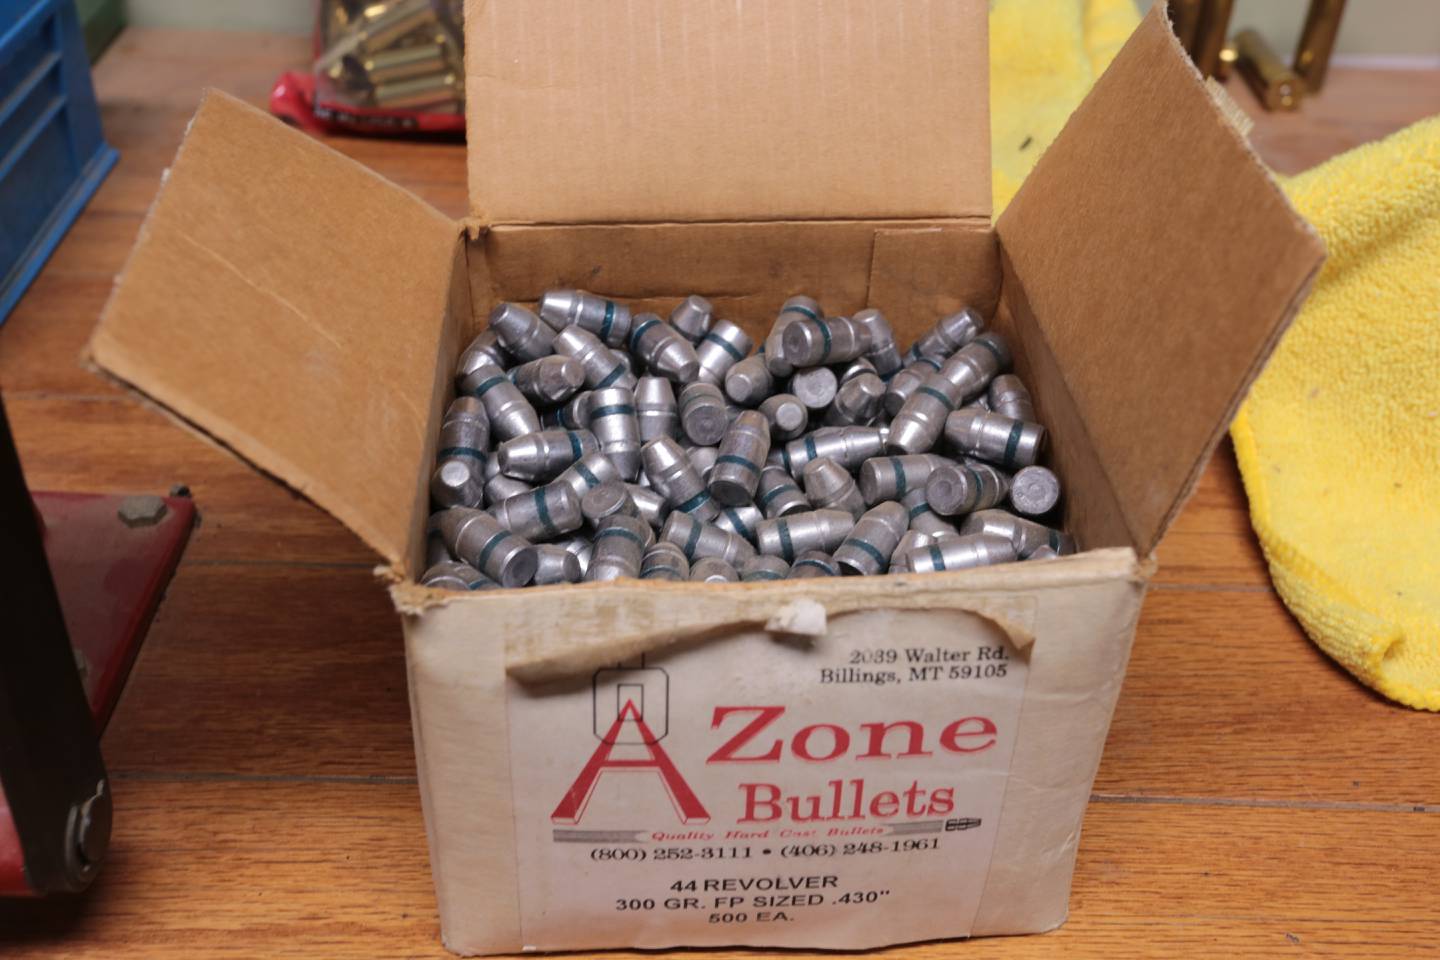 Handling lead bullets may be another source of lead contamination